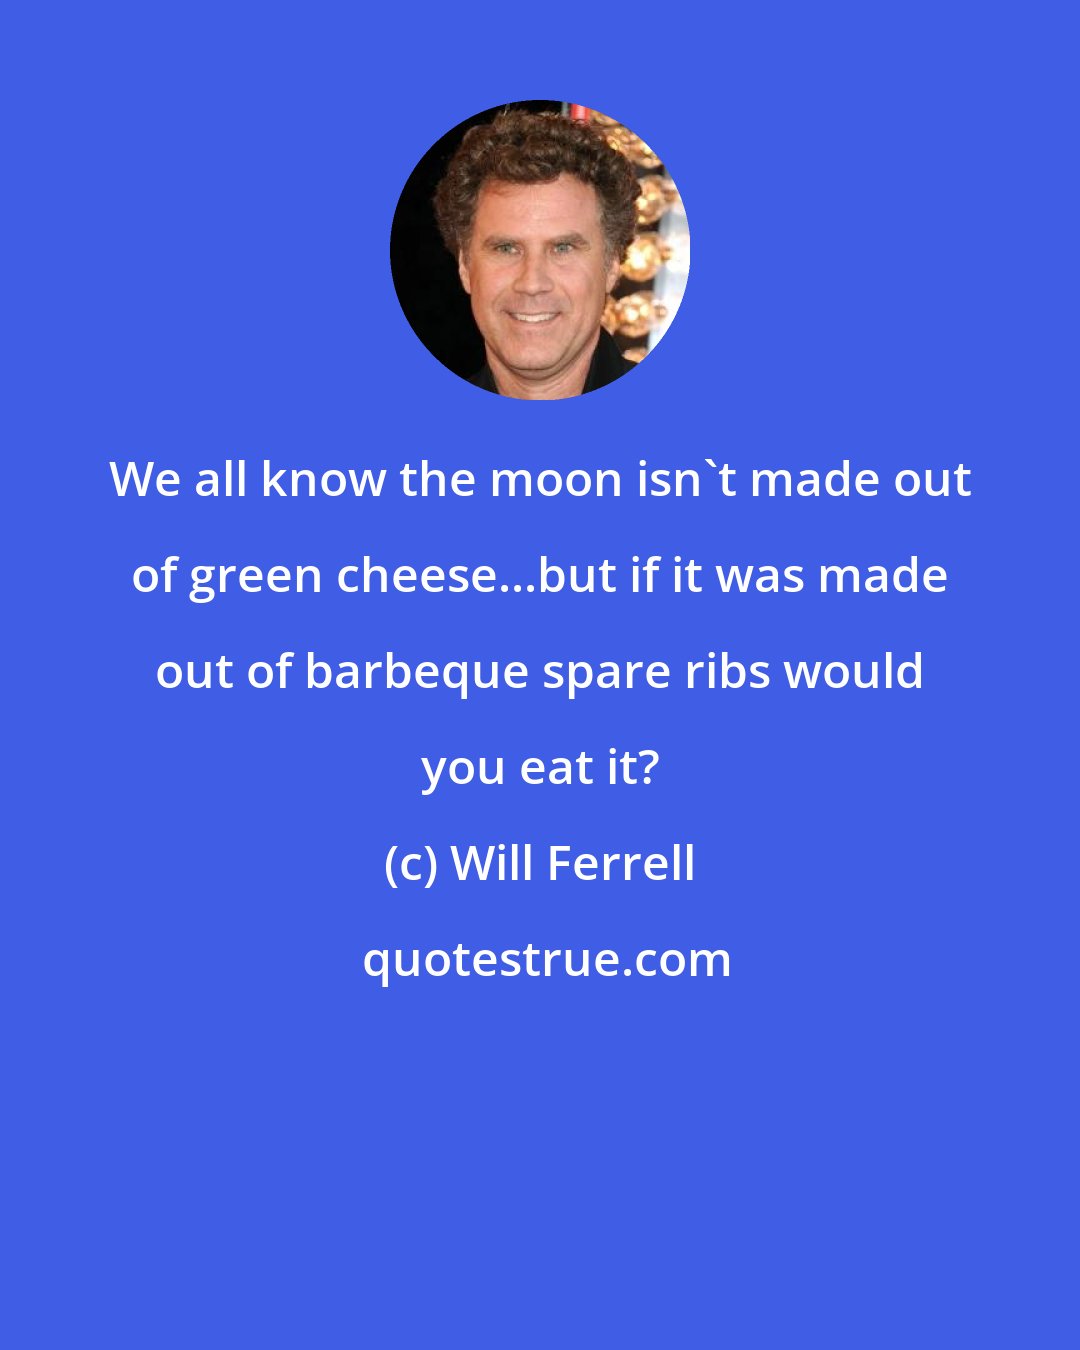 Will Ferrell: We all know the moon isn't made out of green cheese...but if it was made out of barbeque spare ribs would you eat it?